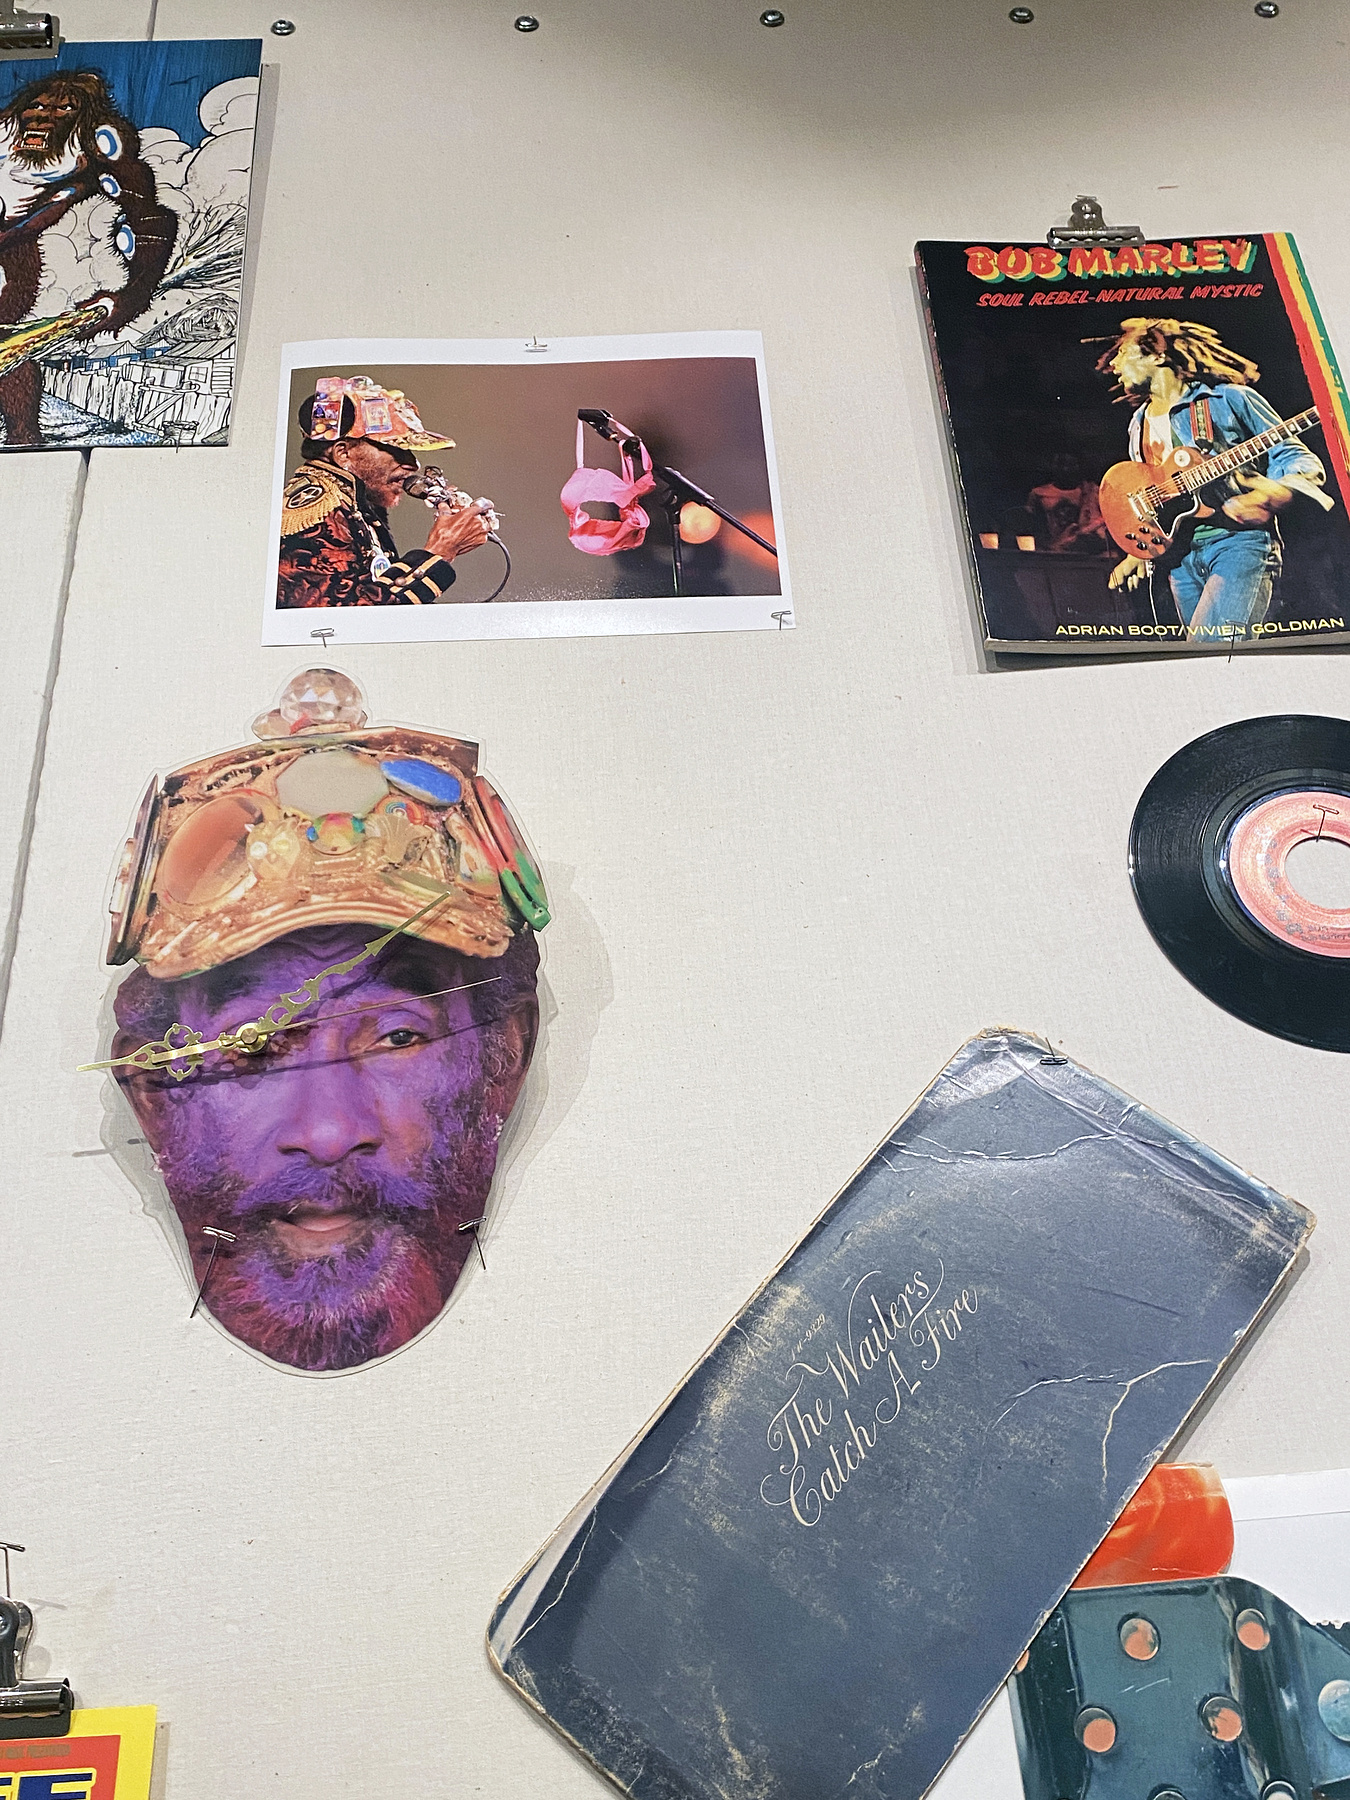 Lee Scratch Perry, Photographic Art Exhibition, The Main Event, NYC, East Village